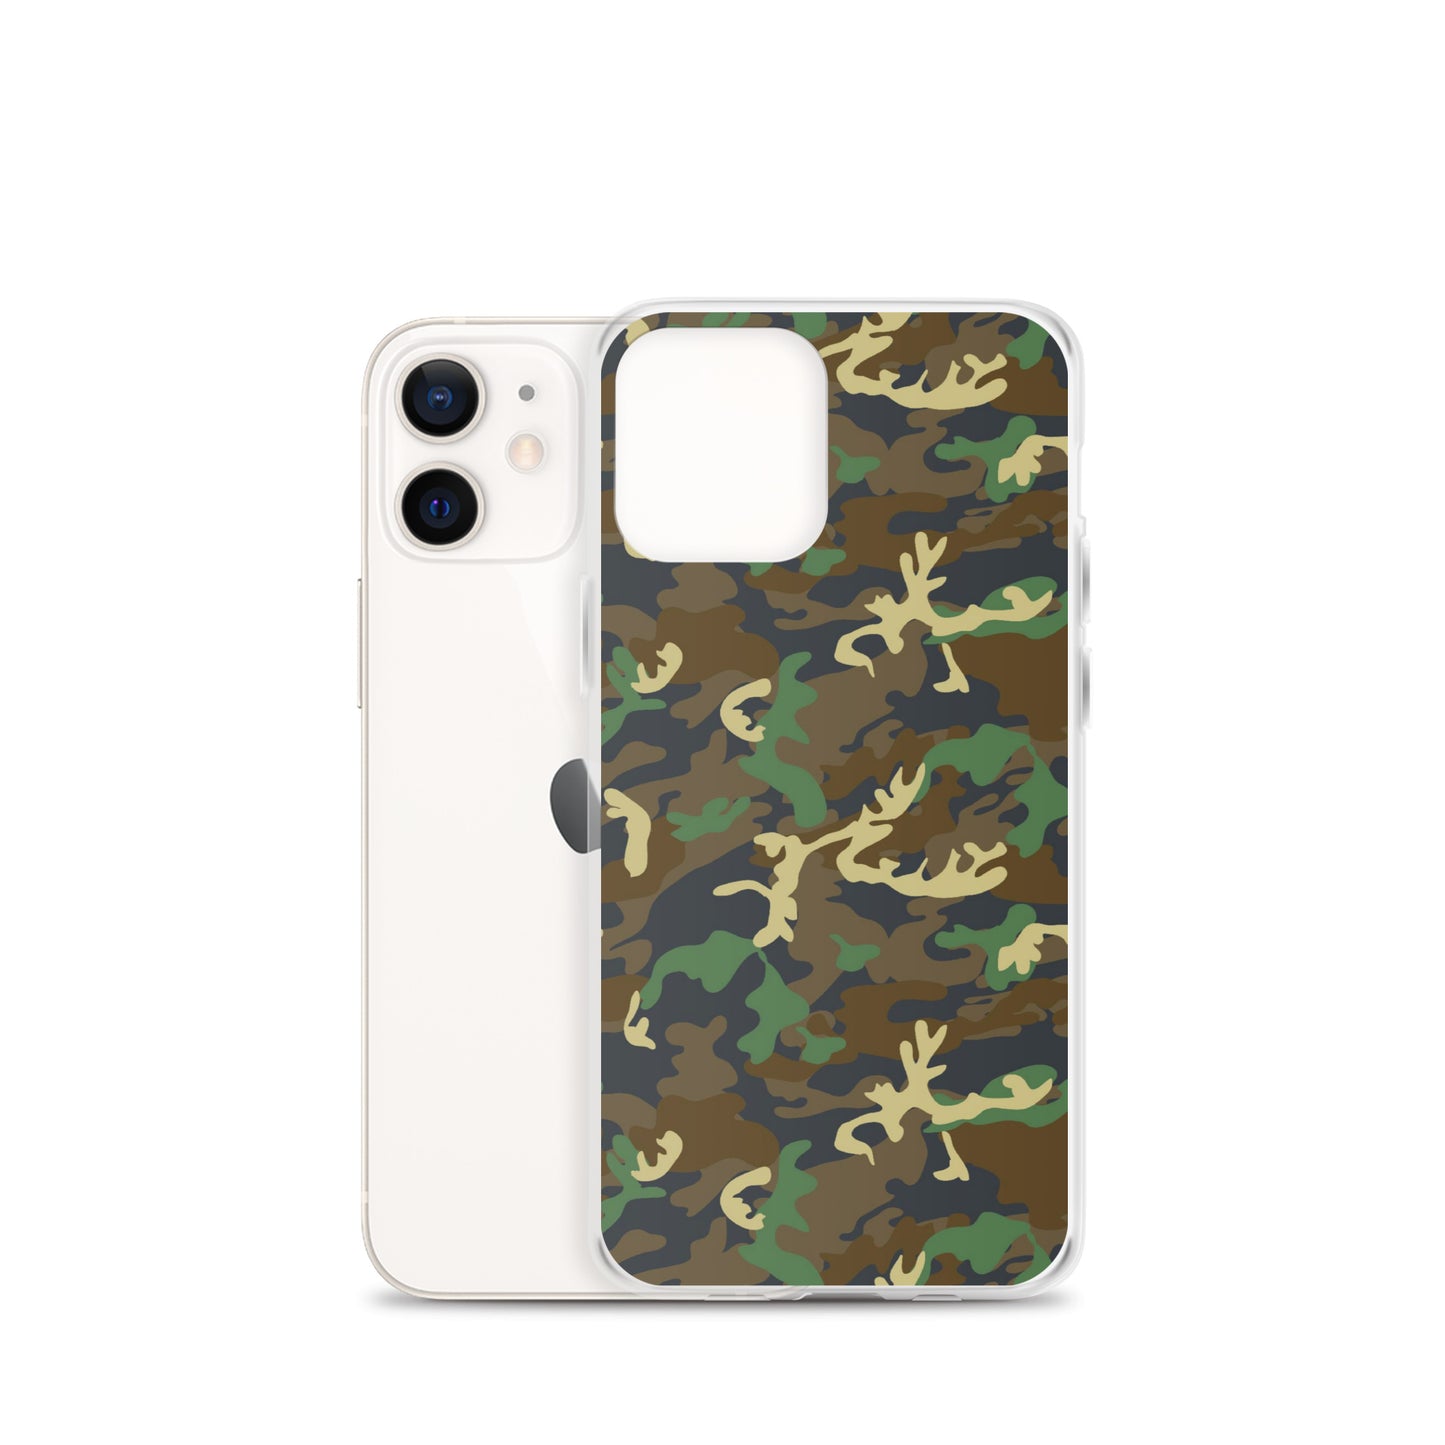 Tense Timber - Clear Case for iPhone